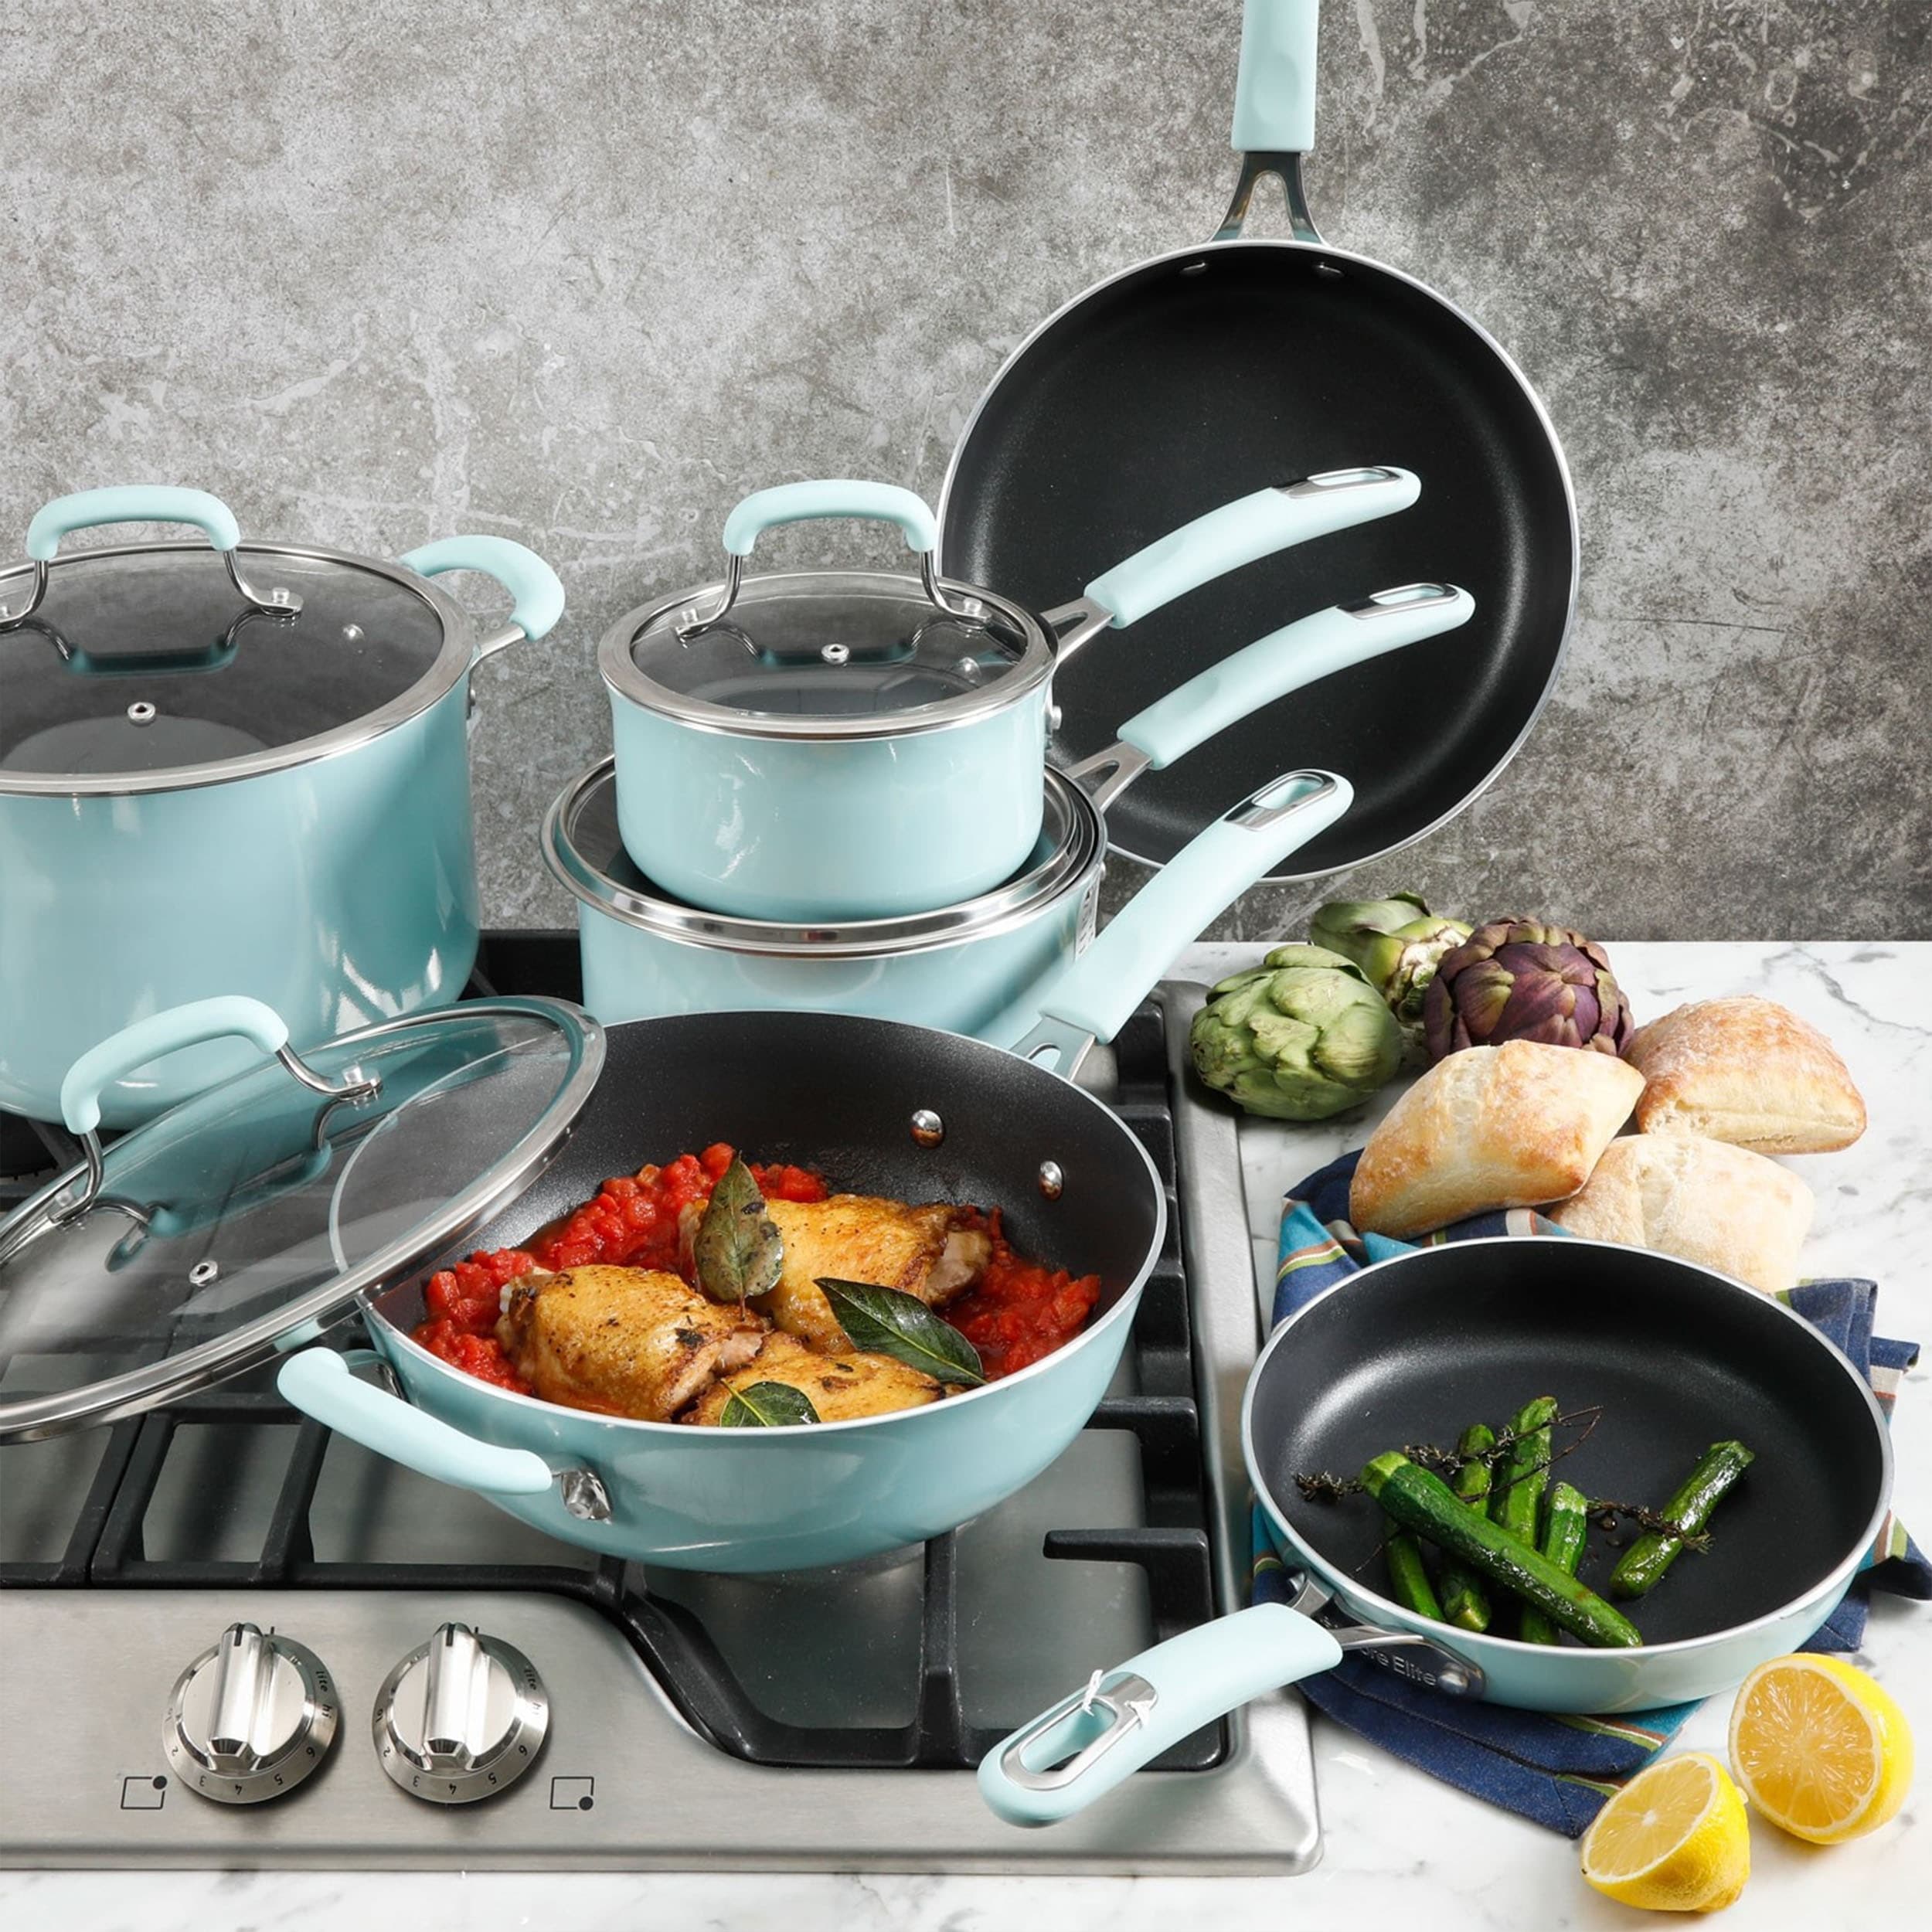 https://ak1.ostkcdn.com/images/products/is/images/direct/28e5521f8a994a6beeeca6e970ccc44504367607/Kenmore-Elite-Andover-10Pc-Nonstick-Al-Cookware-Set-in-Glacier-Blue.jpg